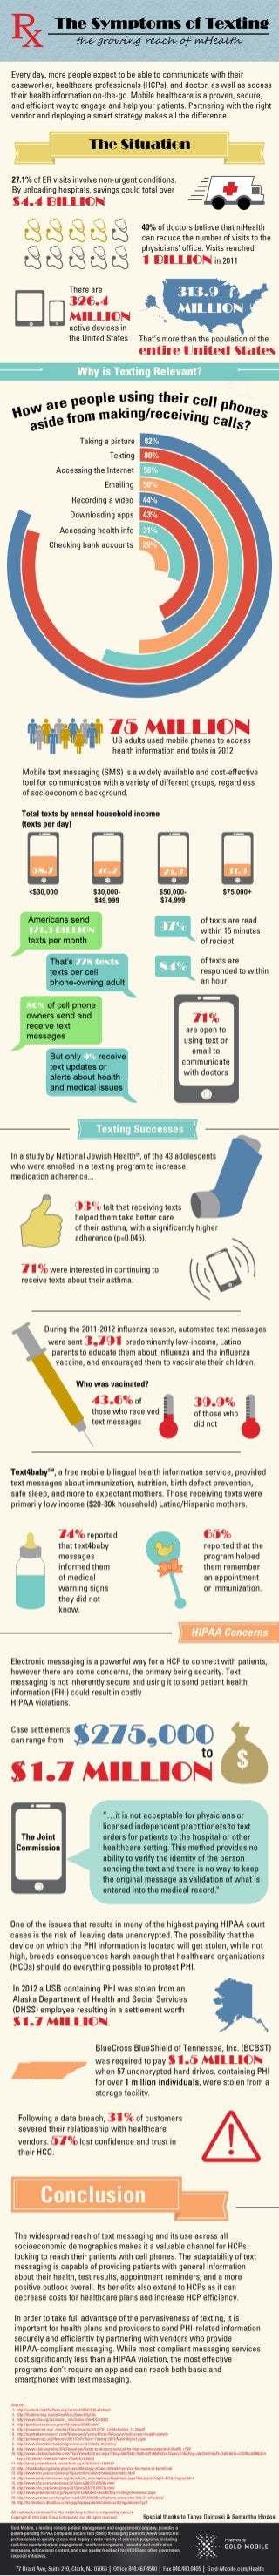 The Symptoms of Texting: the growing reach of mHealth | An infrographic by Gold Mobile